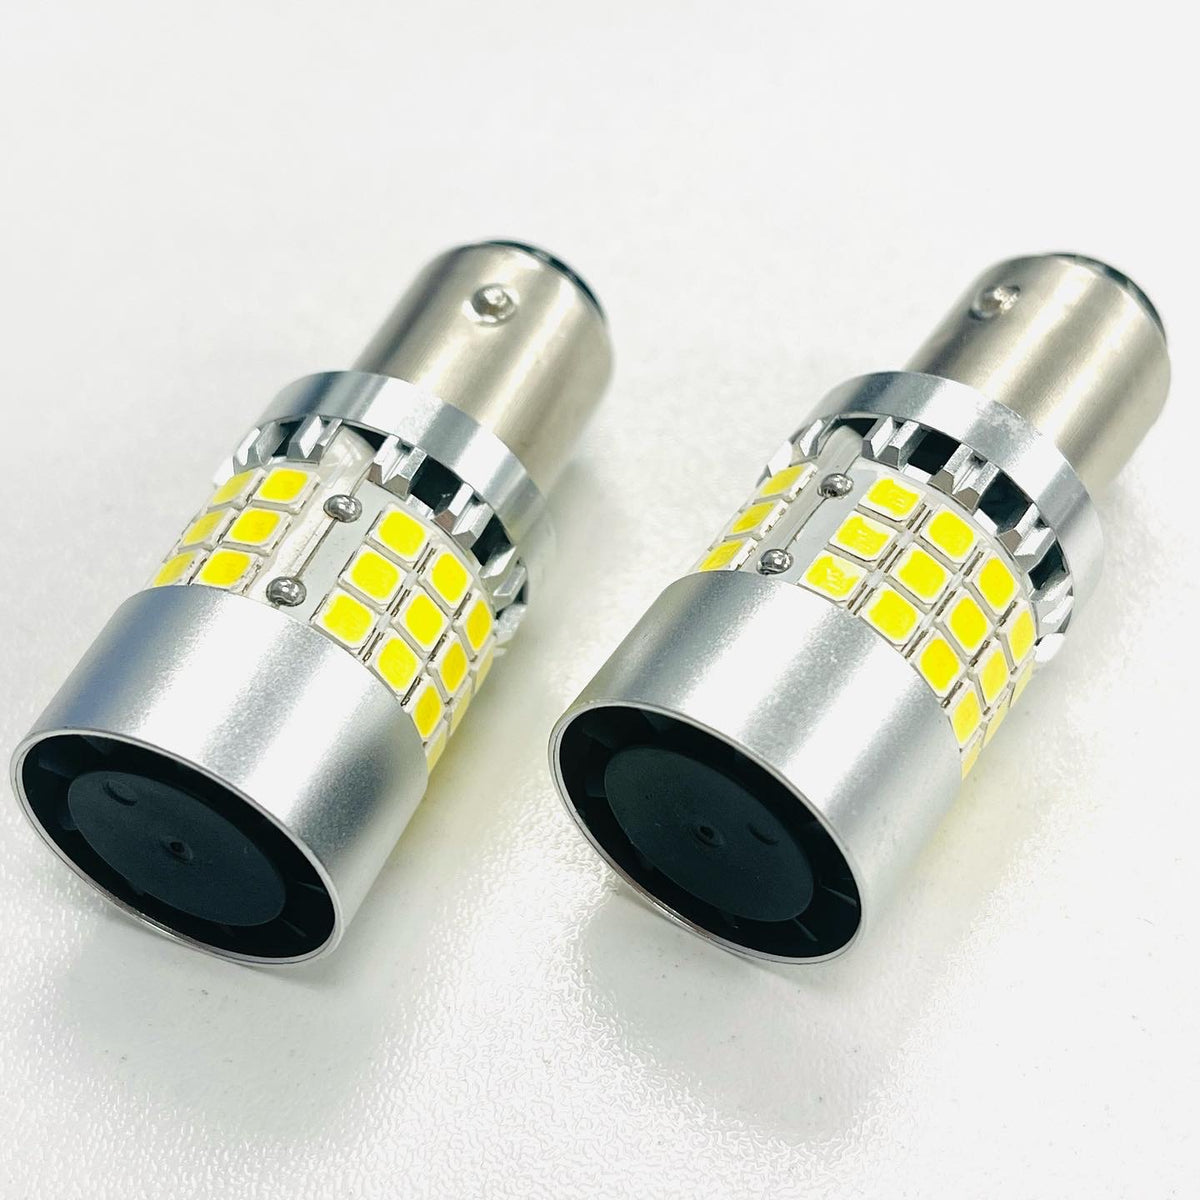 Caddy MK3 Headlights Upgrade Kit DRL Bulbs Philips Racing Vision GT200 H4 &  Chrome Indicator Bulbs Travelin-Lite Explore the World of Possibilities:  Explore our extensive Selection